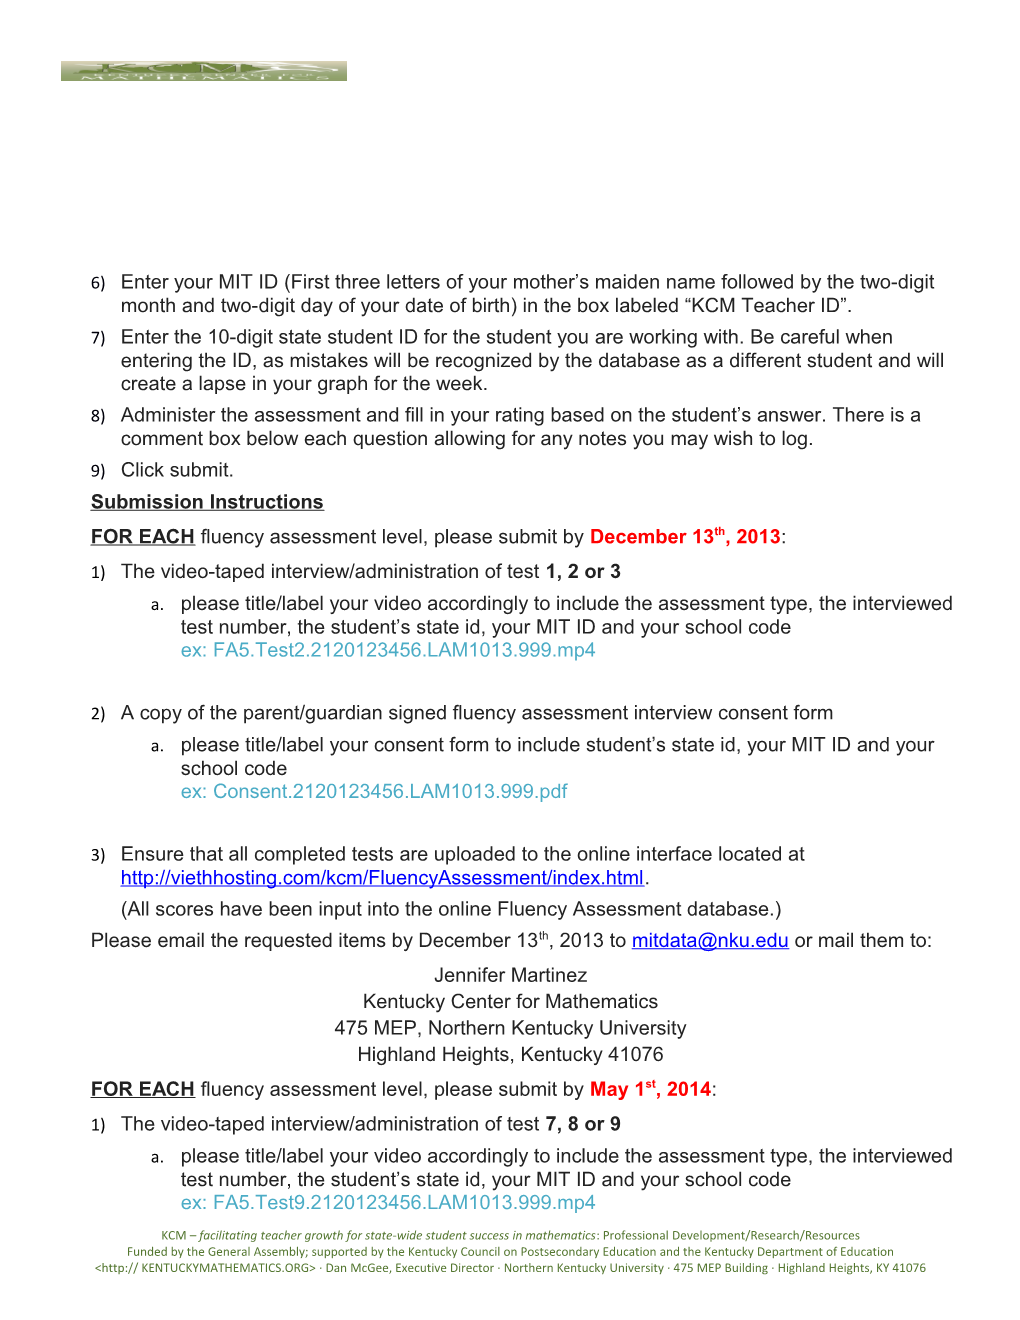 KNP Fluency Assessment Lessons Instructions and Submission Guide